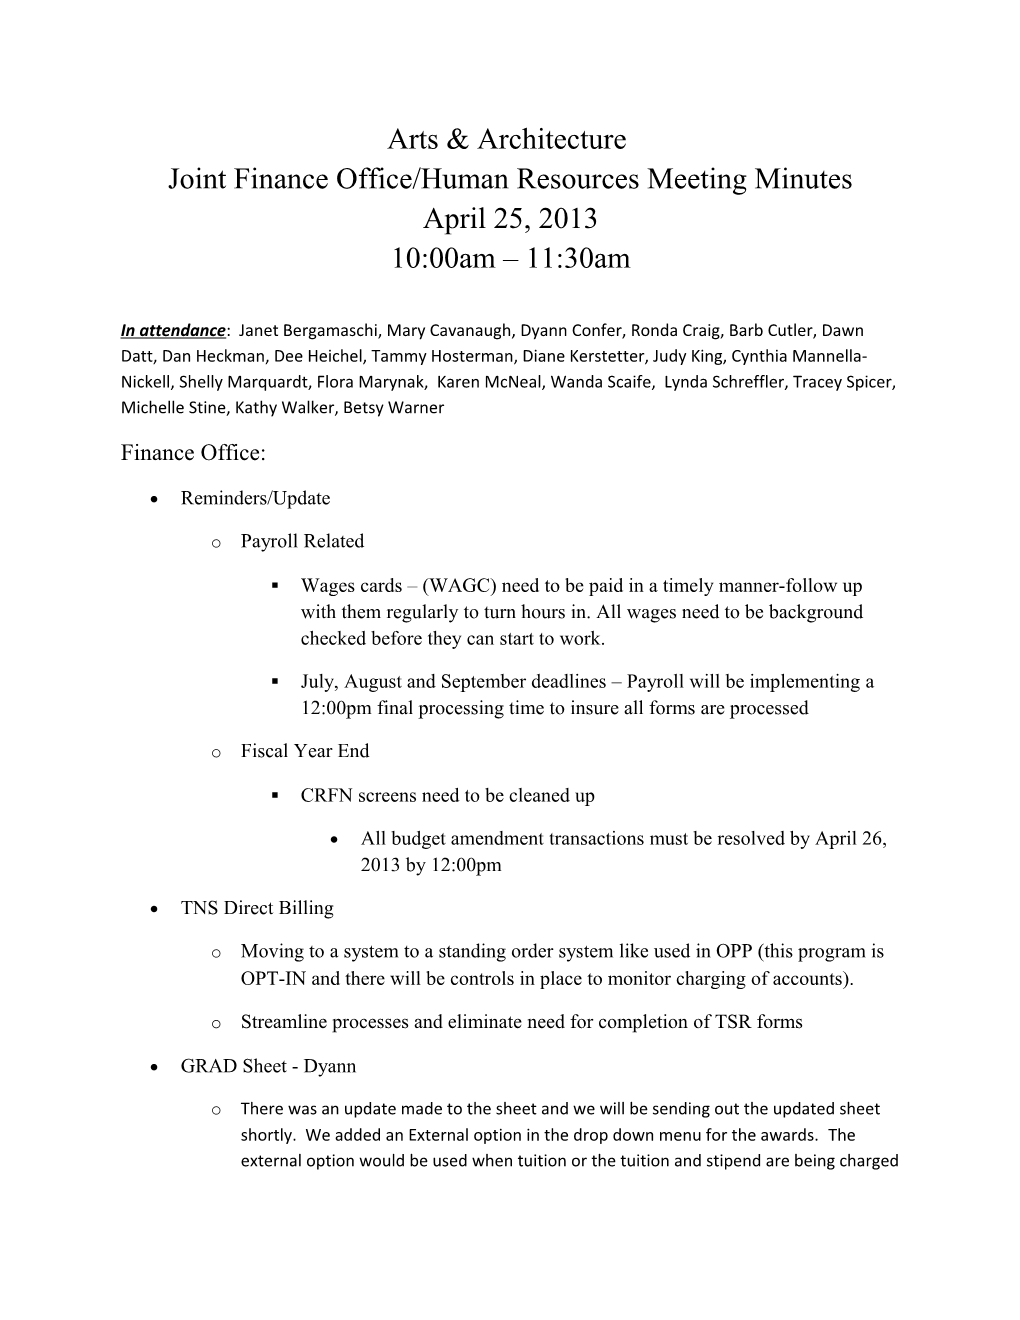 Joint Finance Office/Human Resources Meeting Minutes s2